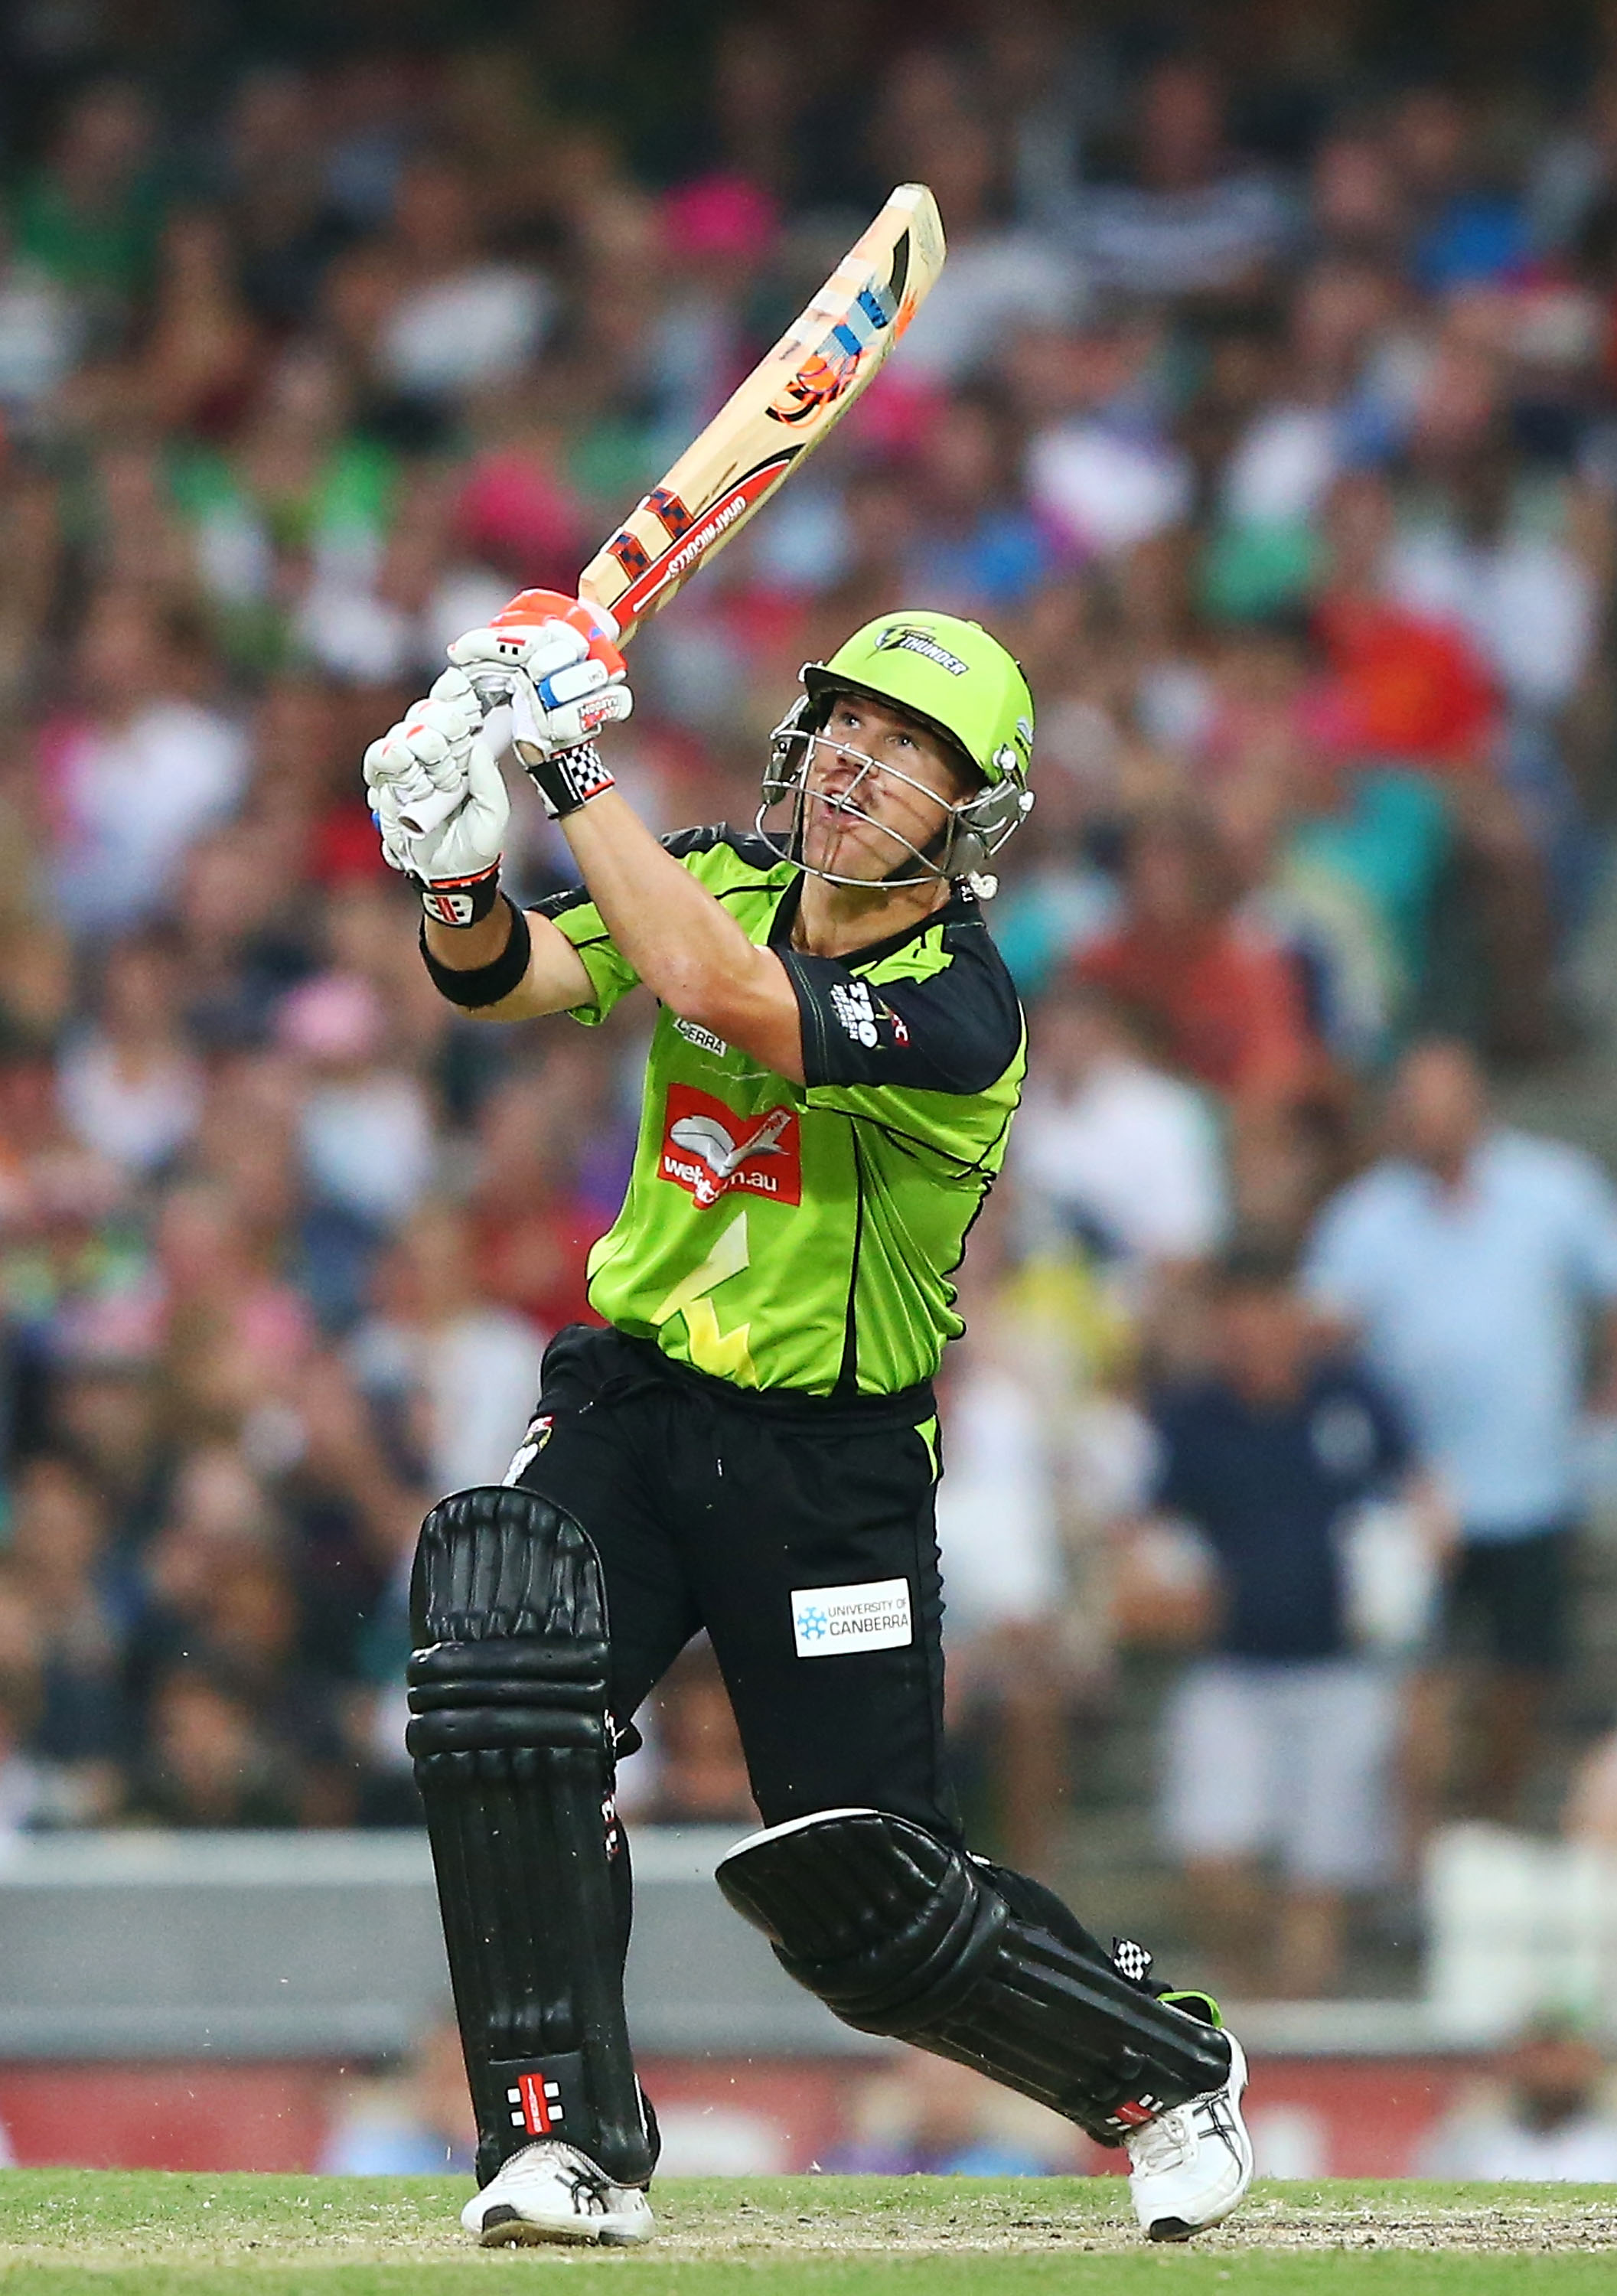 David Warner of the Sydney Thunder during the Big Bash League match between the Sydney Sixers and Sydney Thunder at SCG on December 21, 2013 in Sydney, Australia.